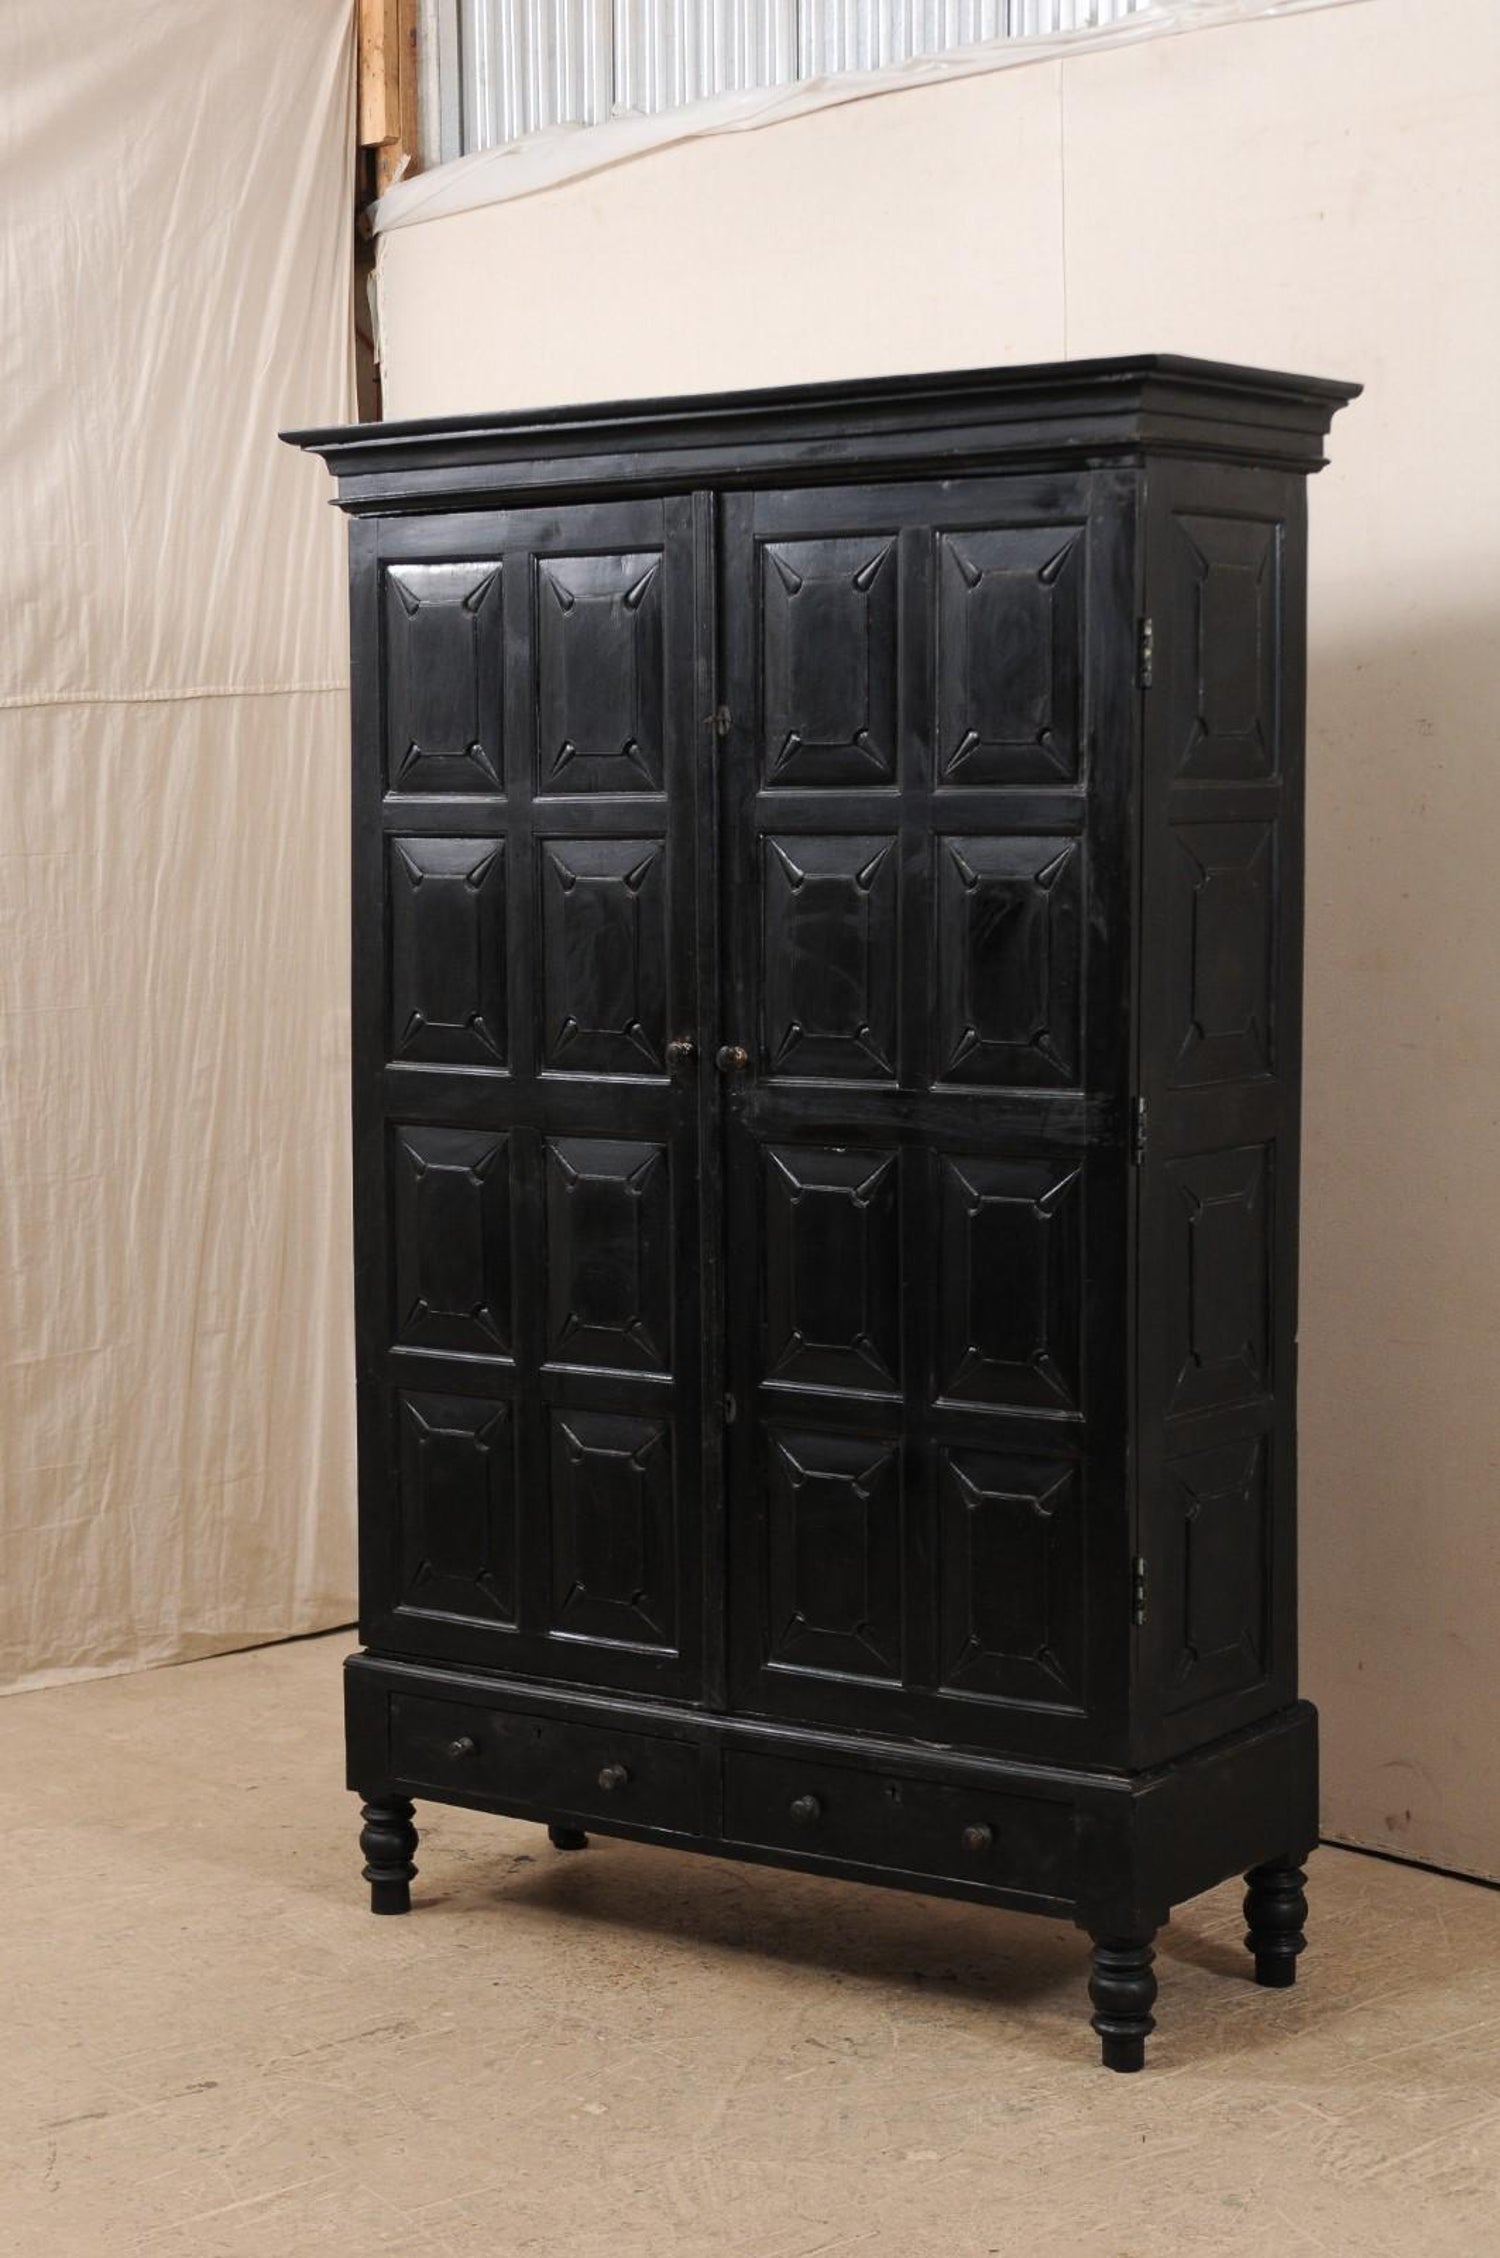 Tall British Colonial Carved Wood Storage Cabinet From The Mid